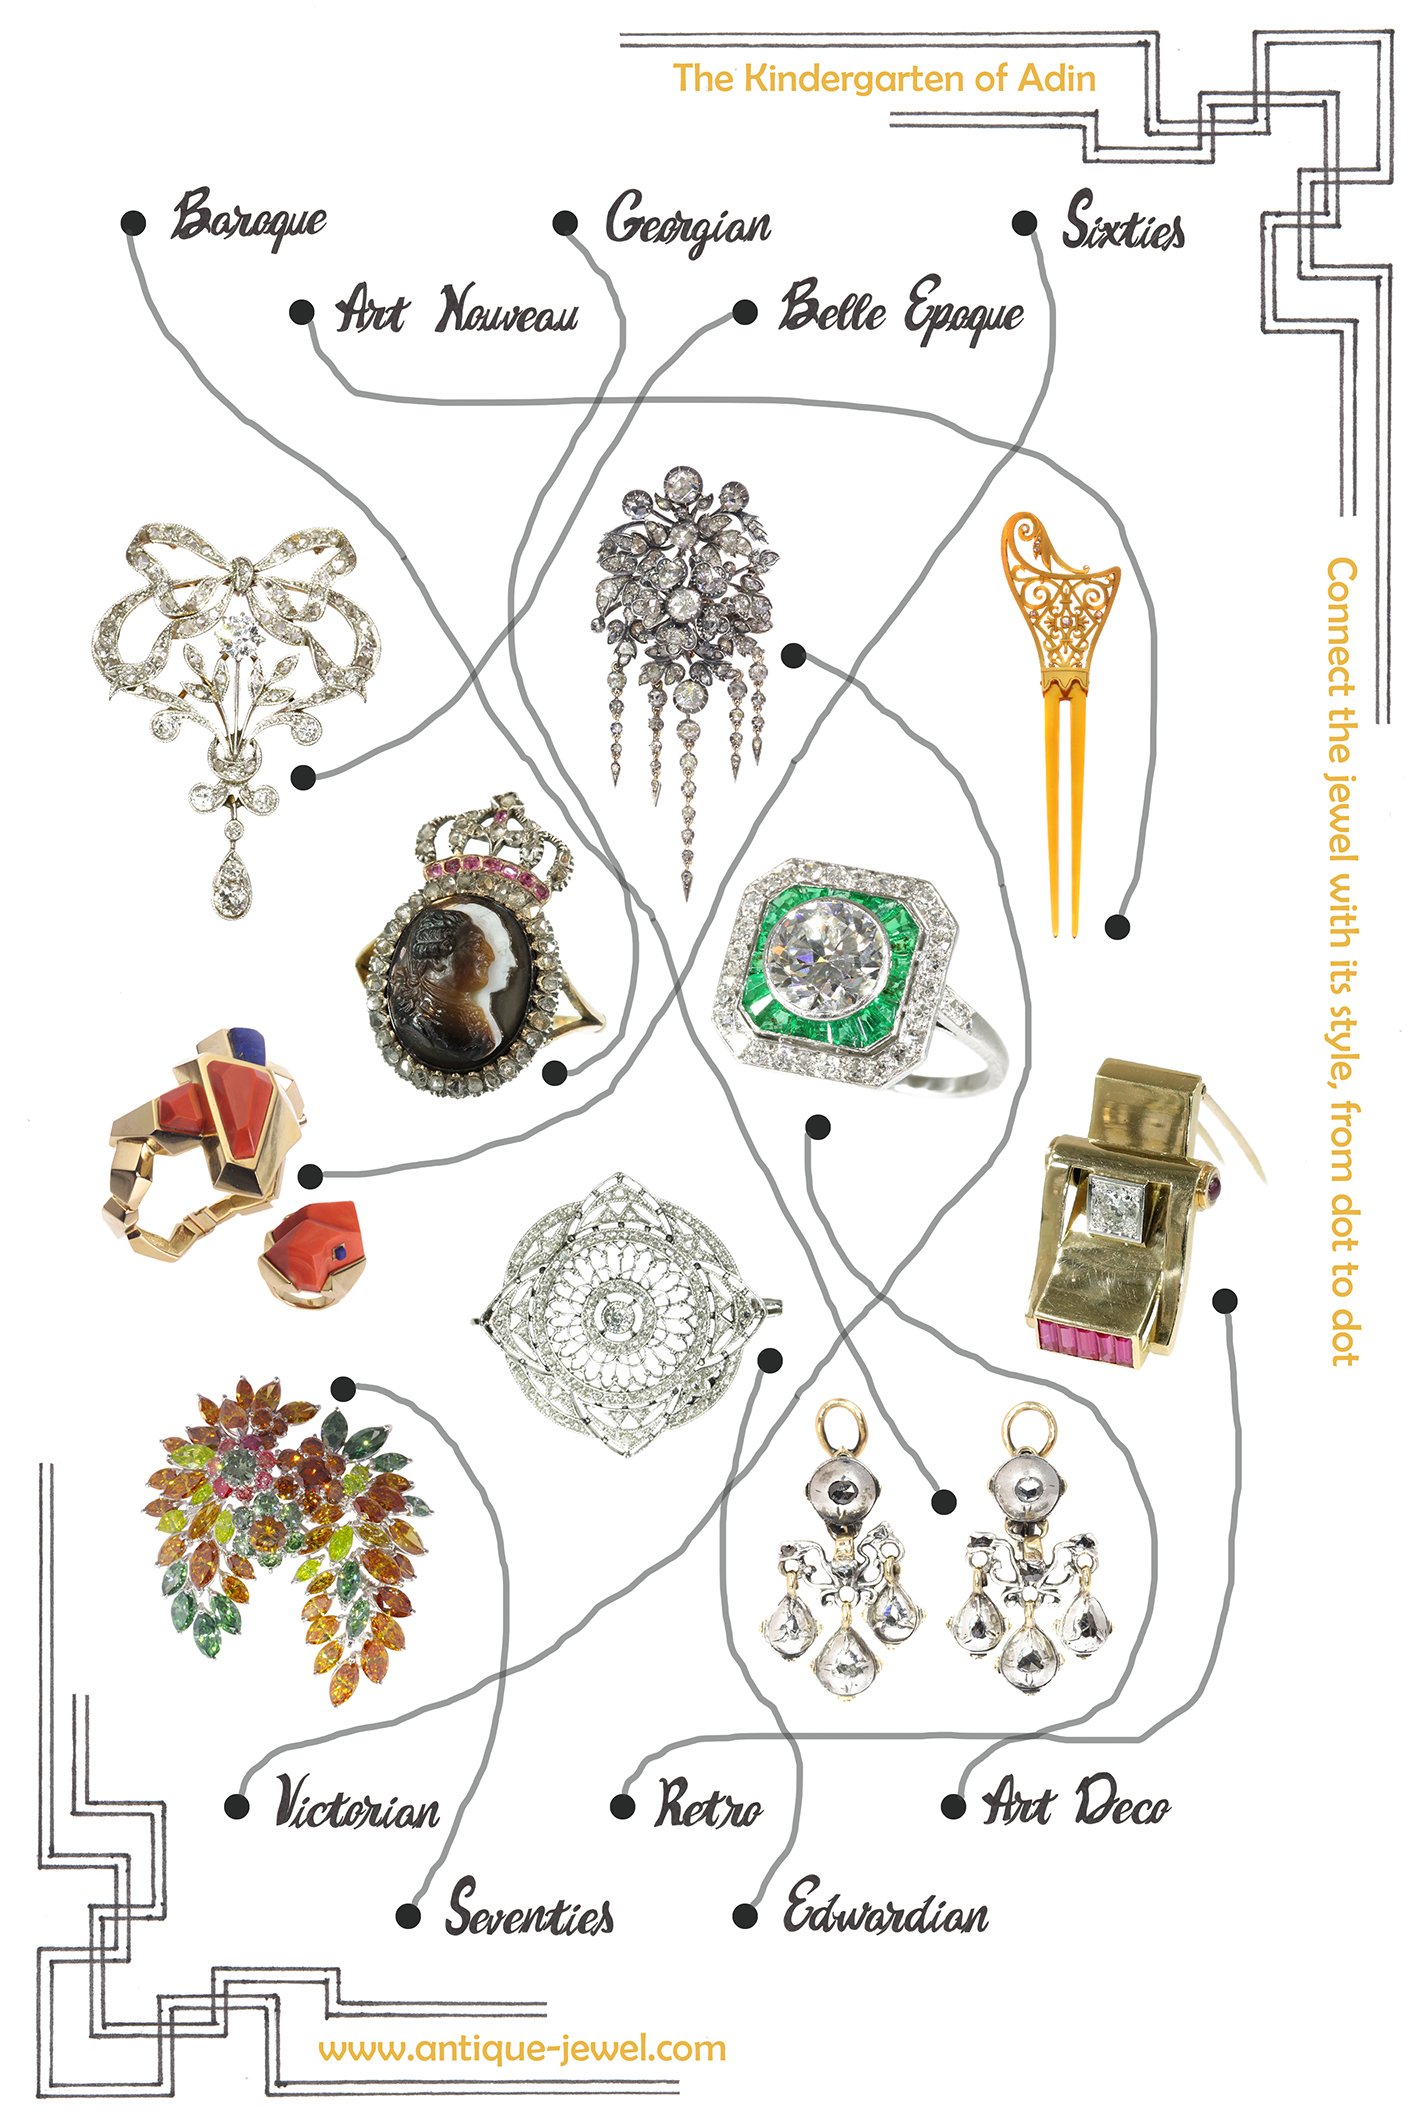 Click picture to check our extensive collection of genuine vintage jewellery